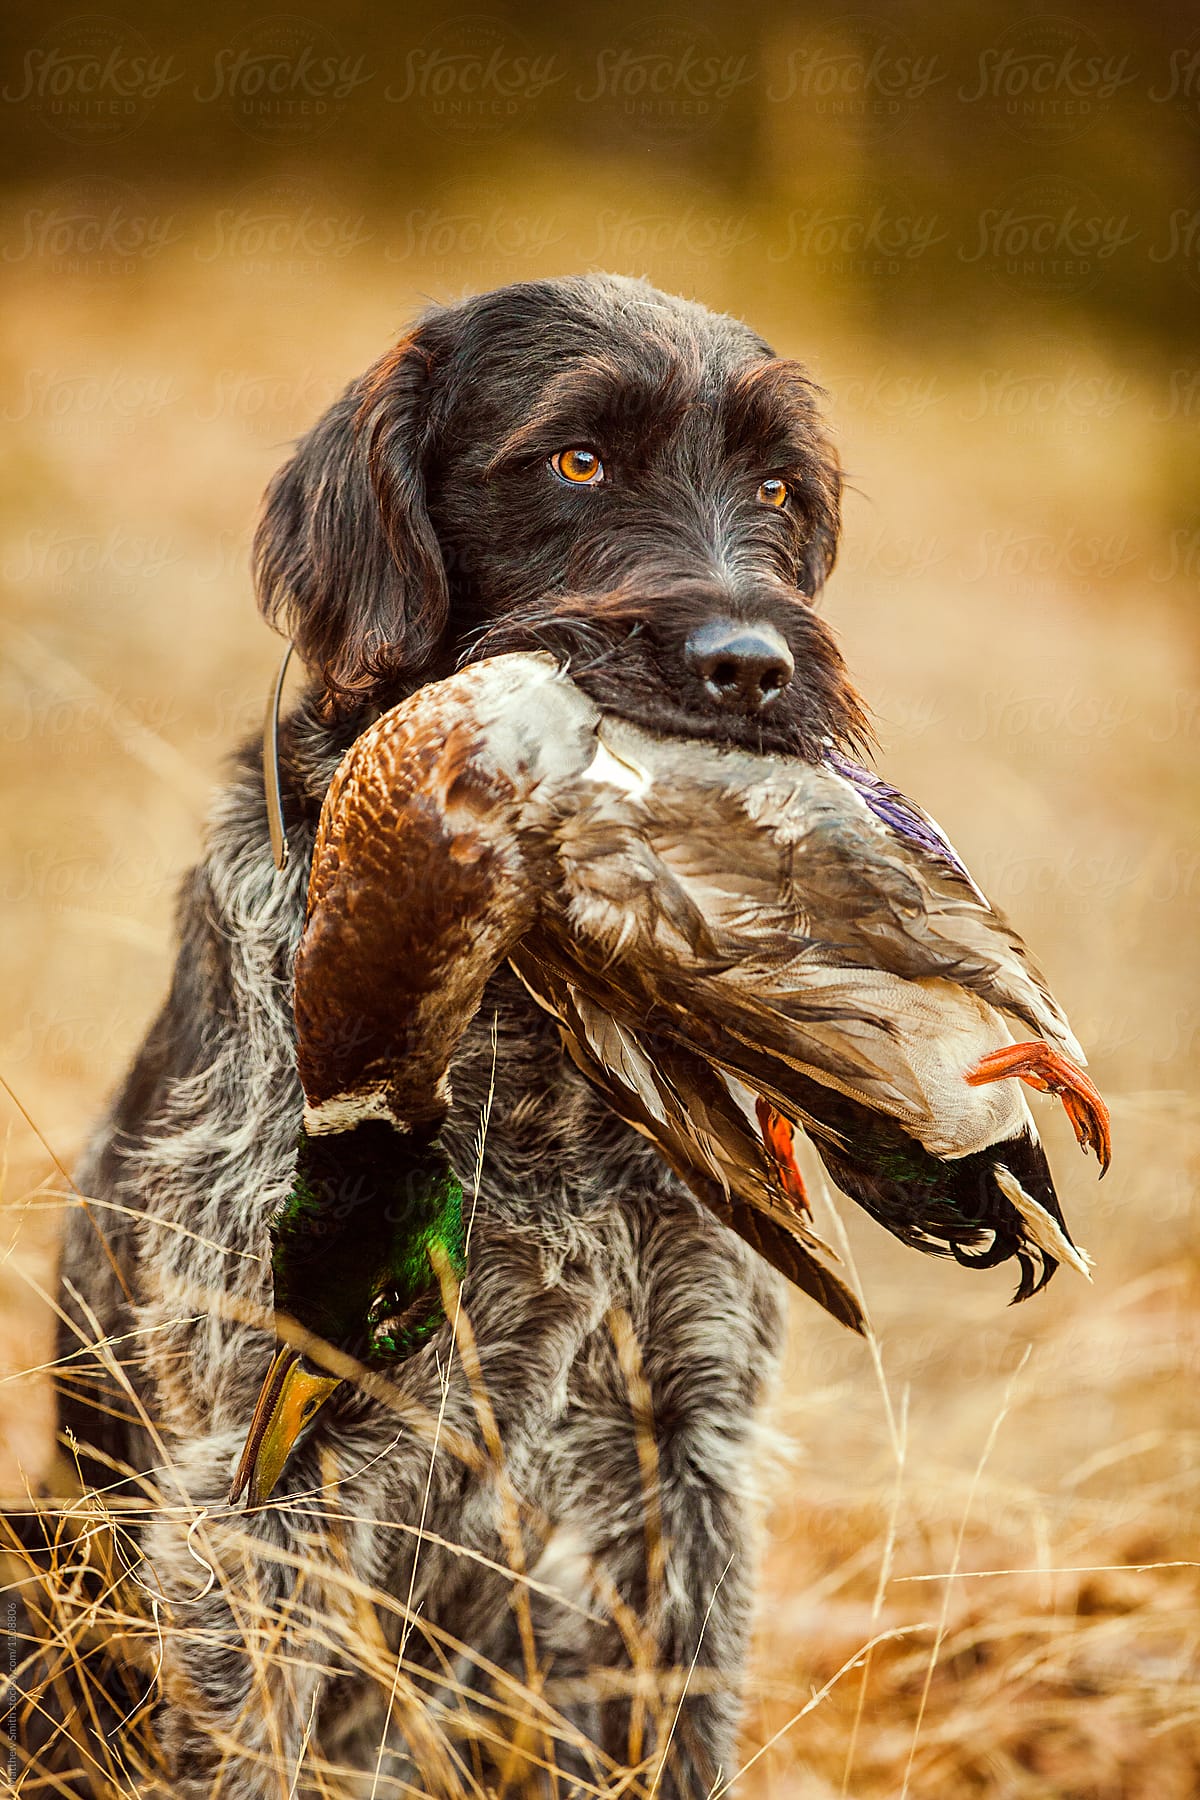 Hunting Dog Holding Dead Duck In Its 